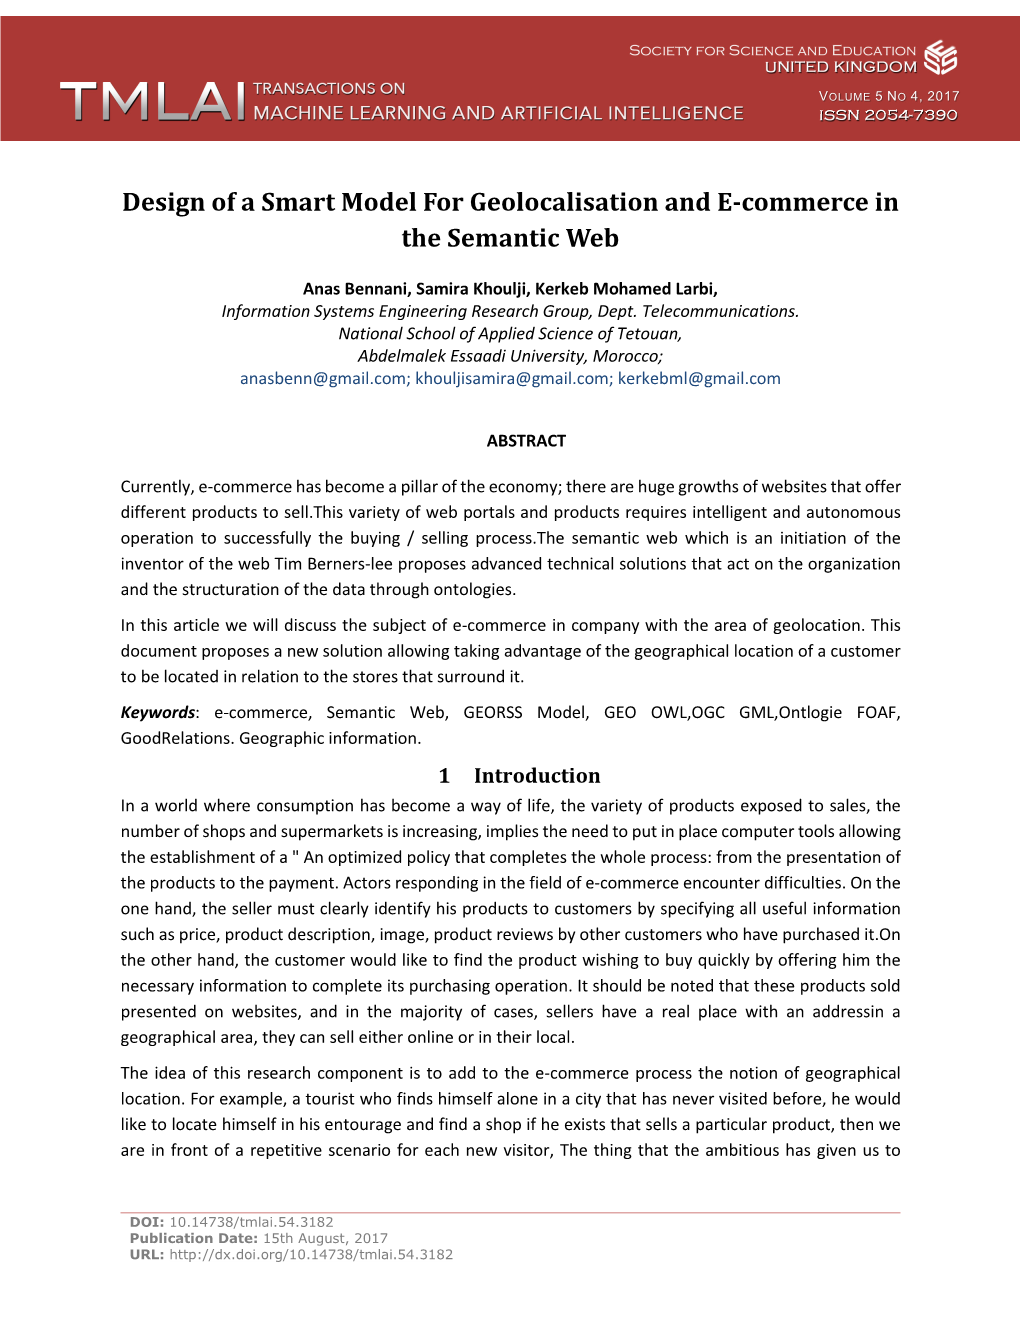 Design of a Smart Model for Geolocalisation and E-Commerce in the Semantic Web